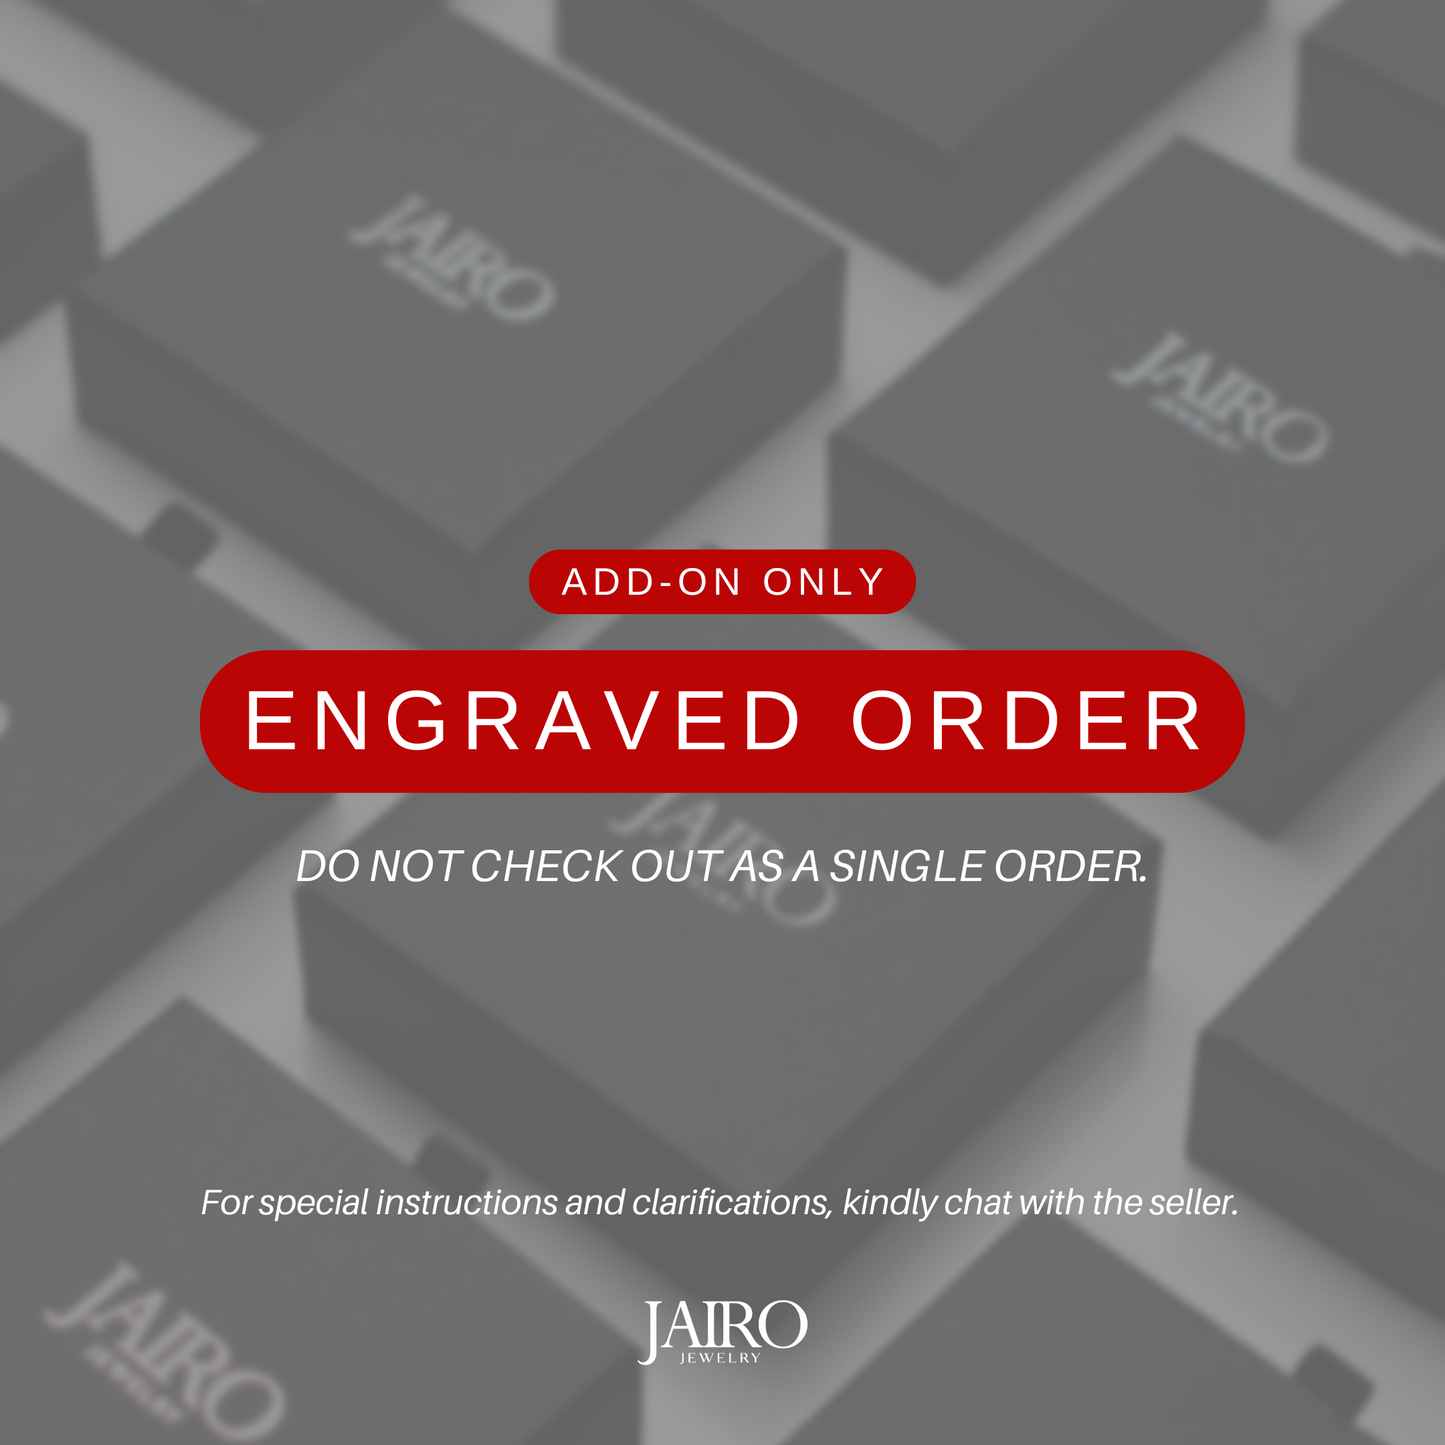 JAIRO Engraved Order [ADD-ON ONLY]